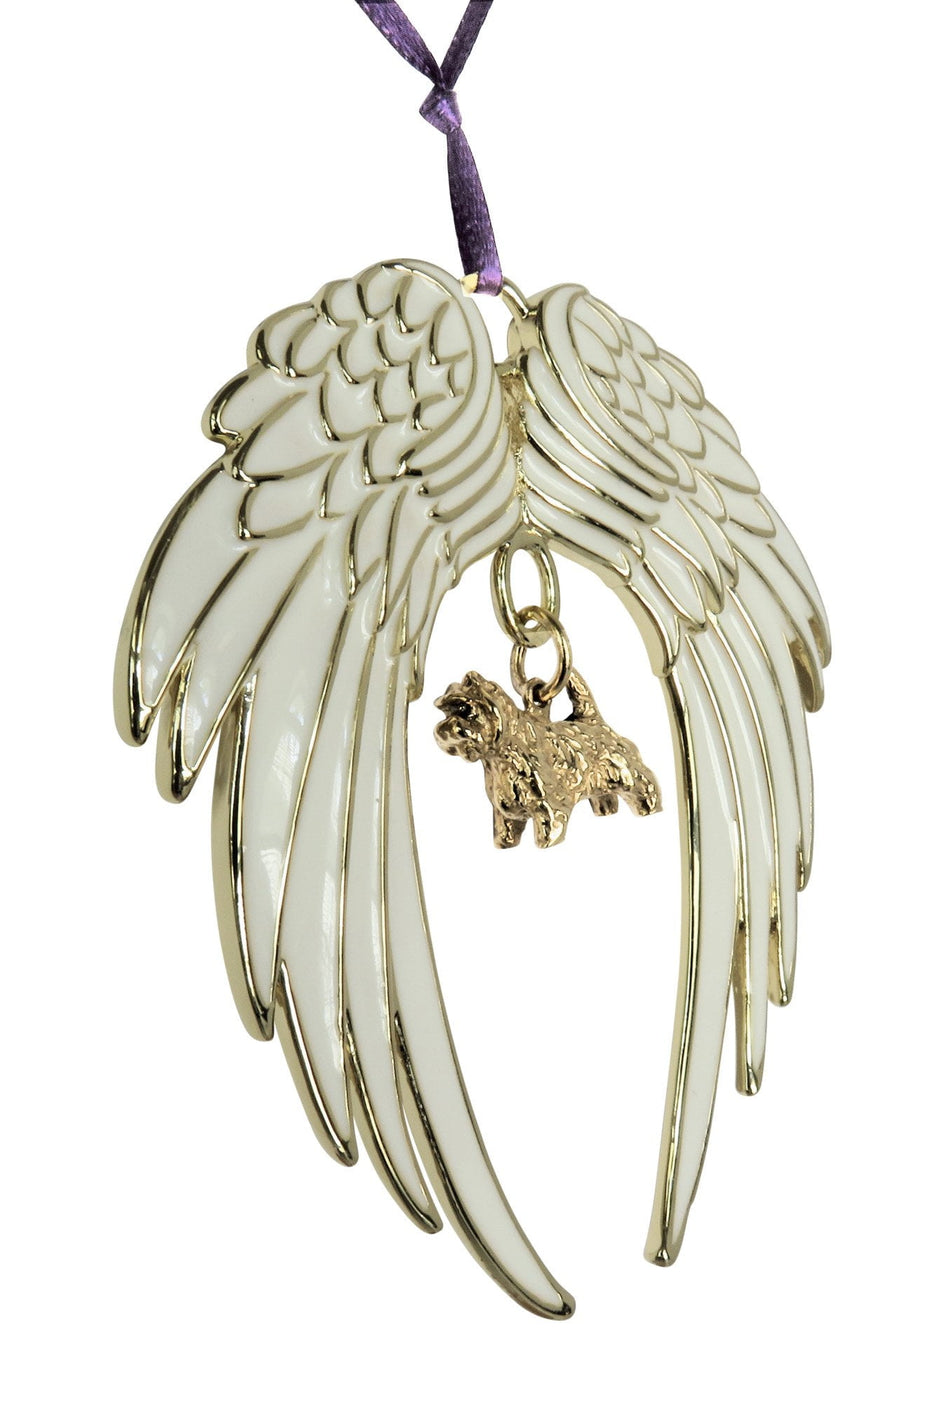 Cairn Terrier Gold Plated Holiday Angel Wing Ornament